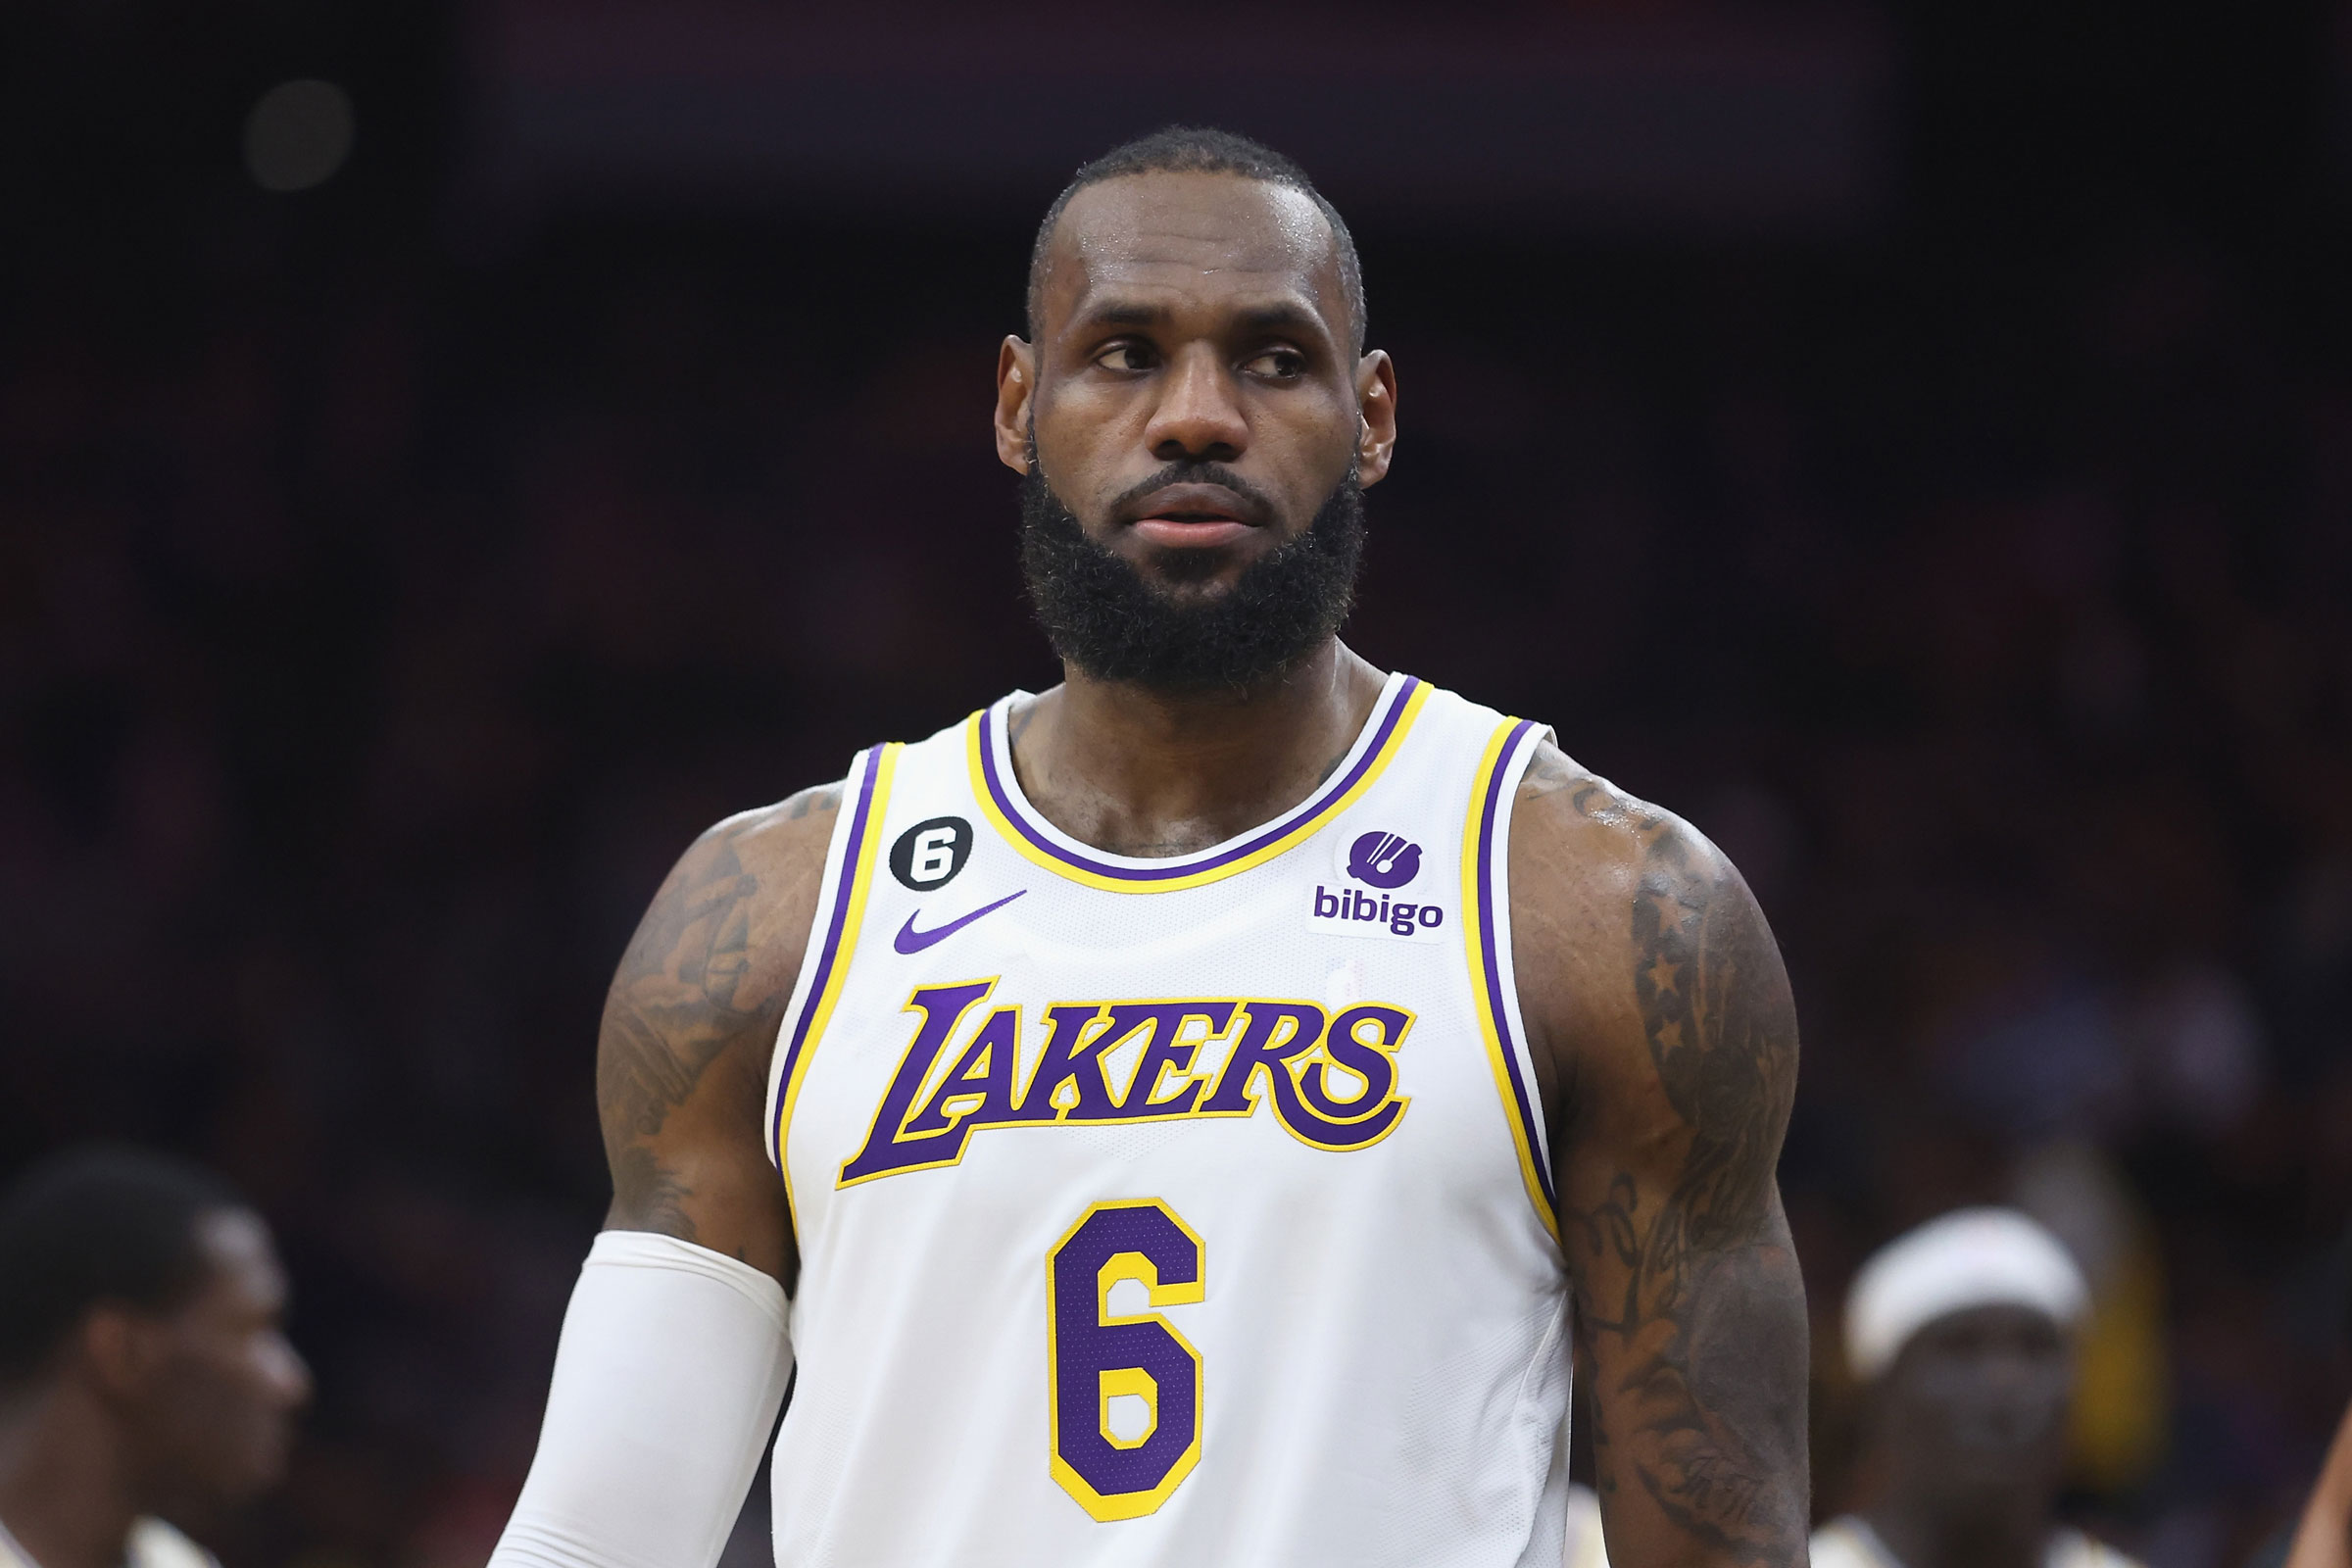 LeBron James of the Los Angeles Lakers looks on in the second quarter against the Sacramento Kings at Golden 1 Center in Sacramento on Jan. 7, 2023.